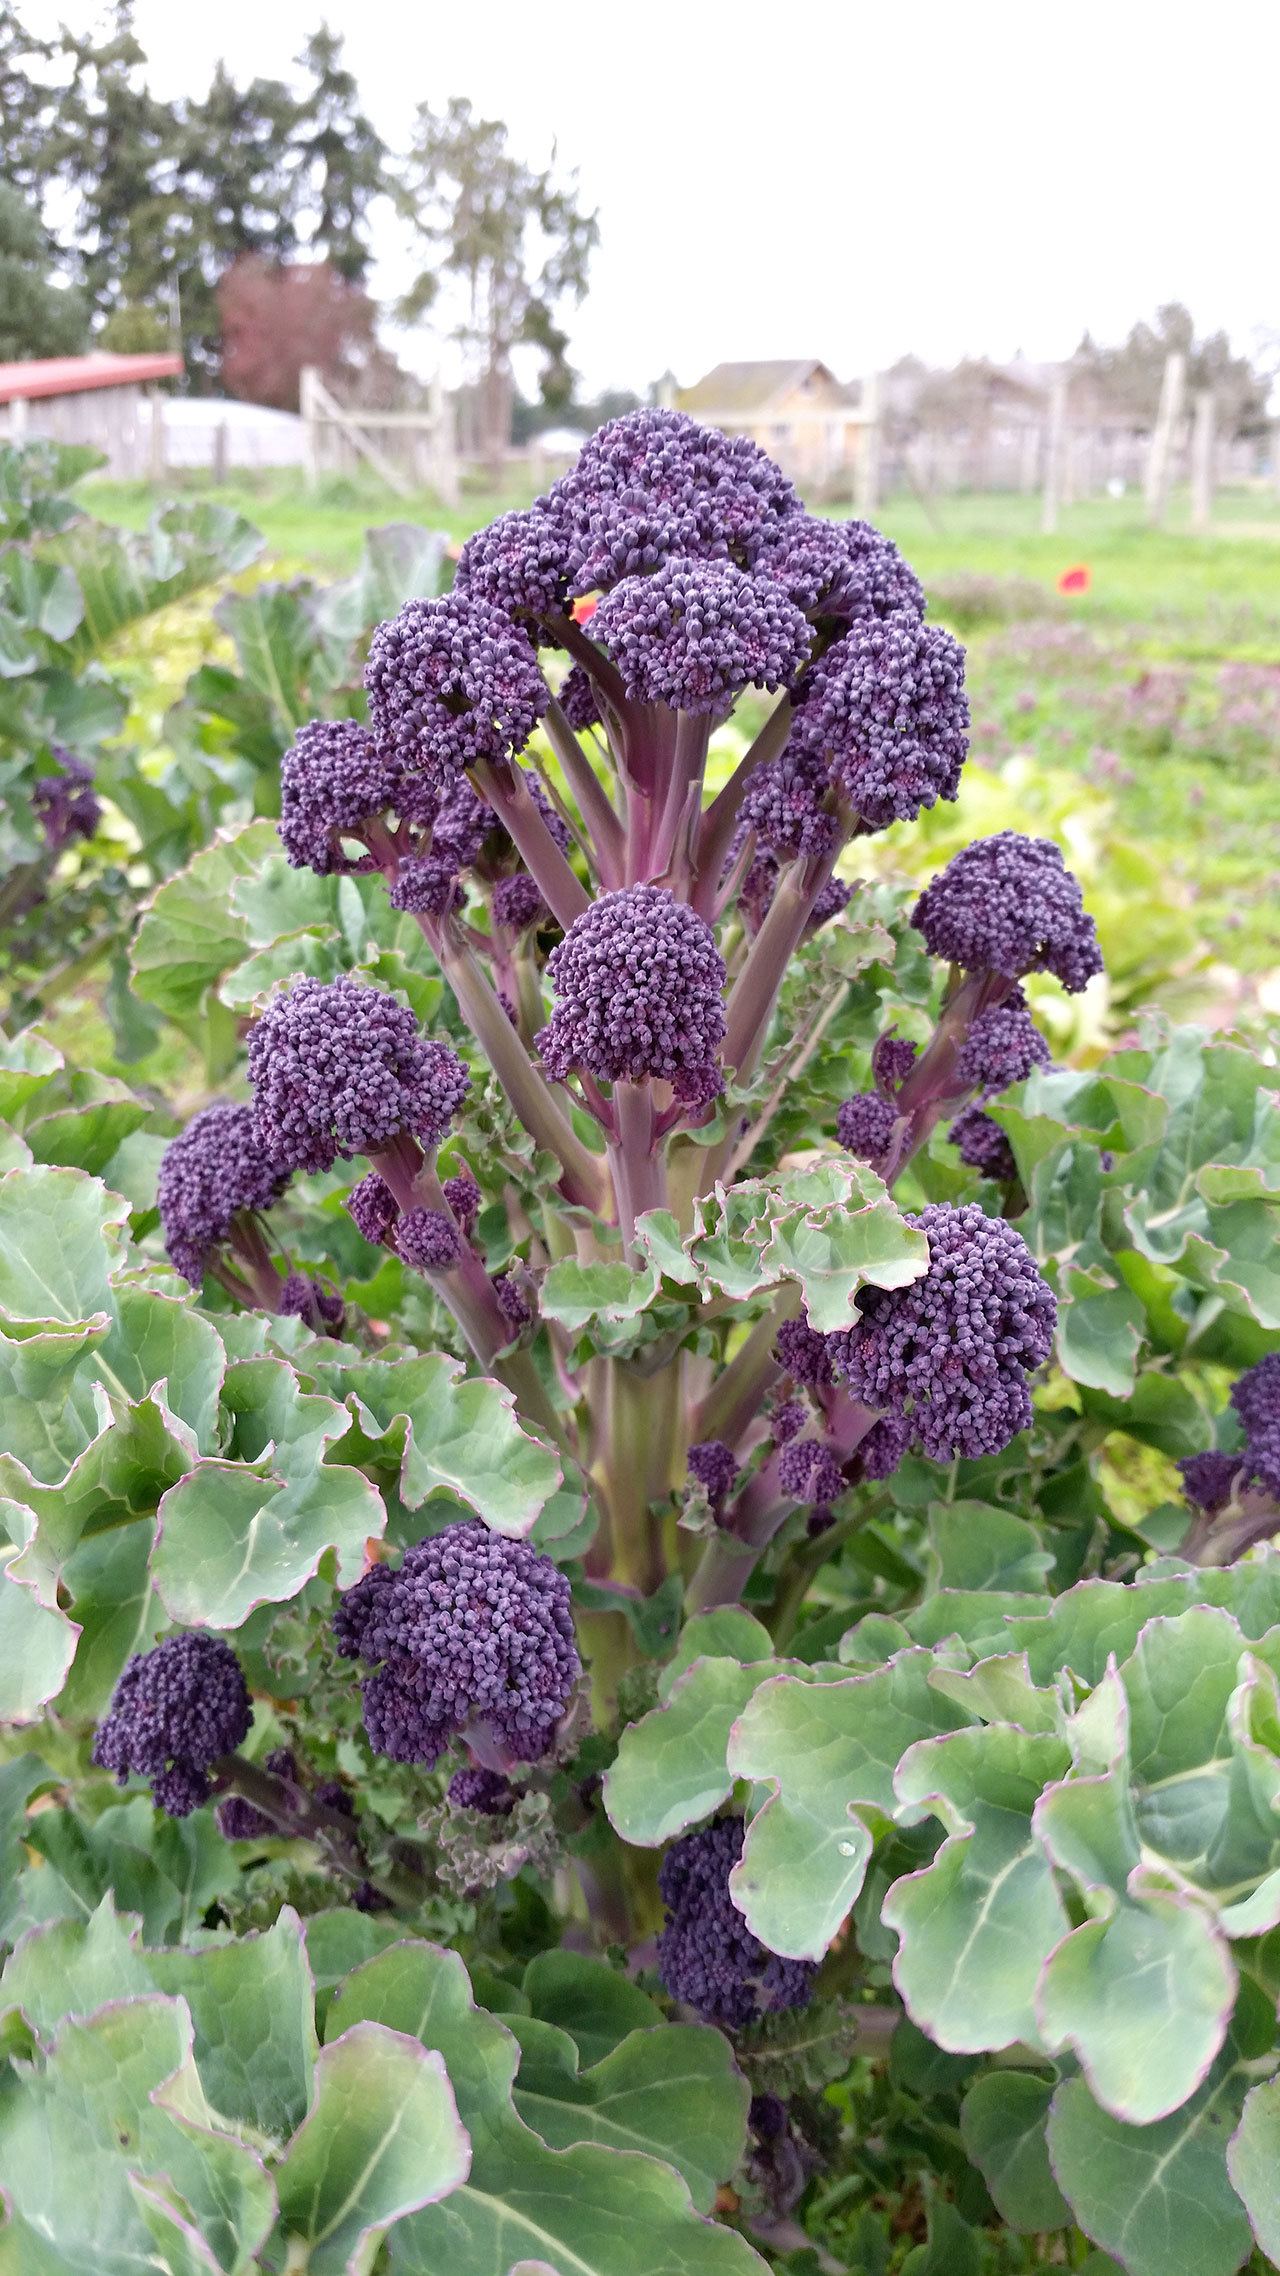 Purple broccoli is just one of a few of the crops being tested by the Organic Seed Alliance and local farmers to expand the Northwest growing season in the winter. (Organic Seed Alliance)